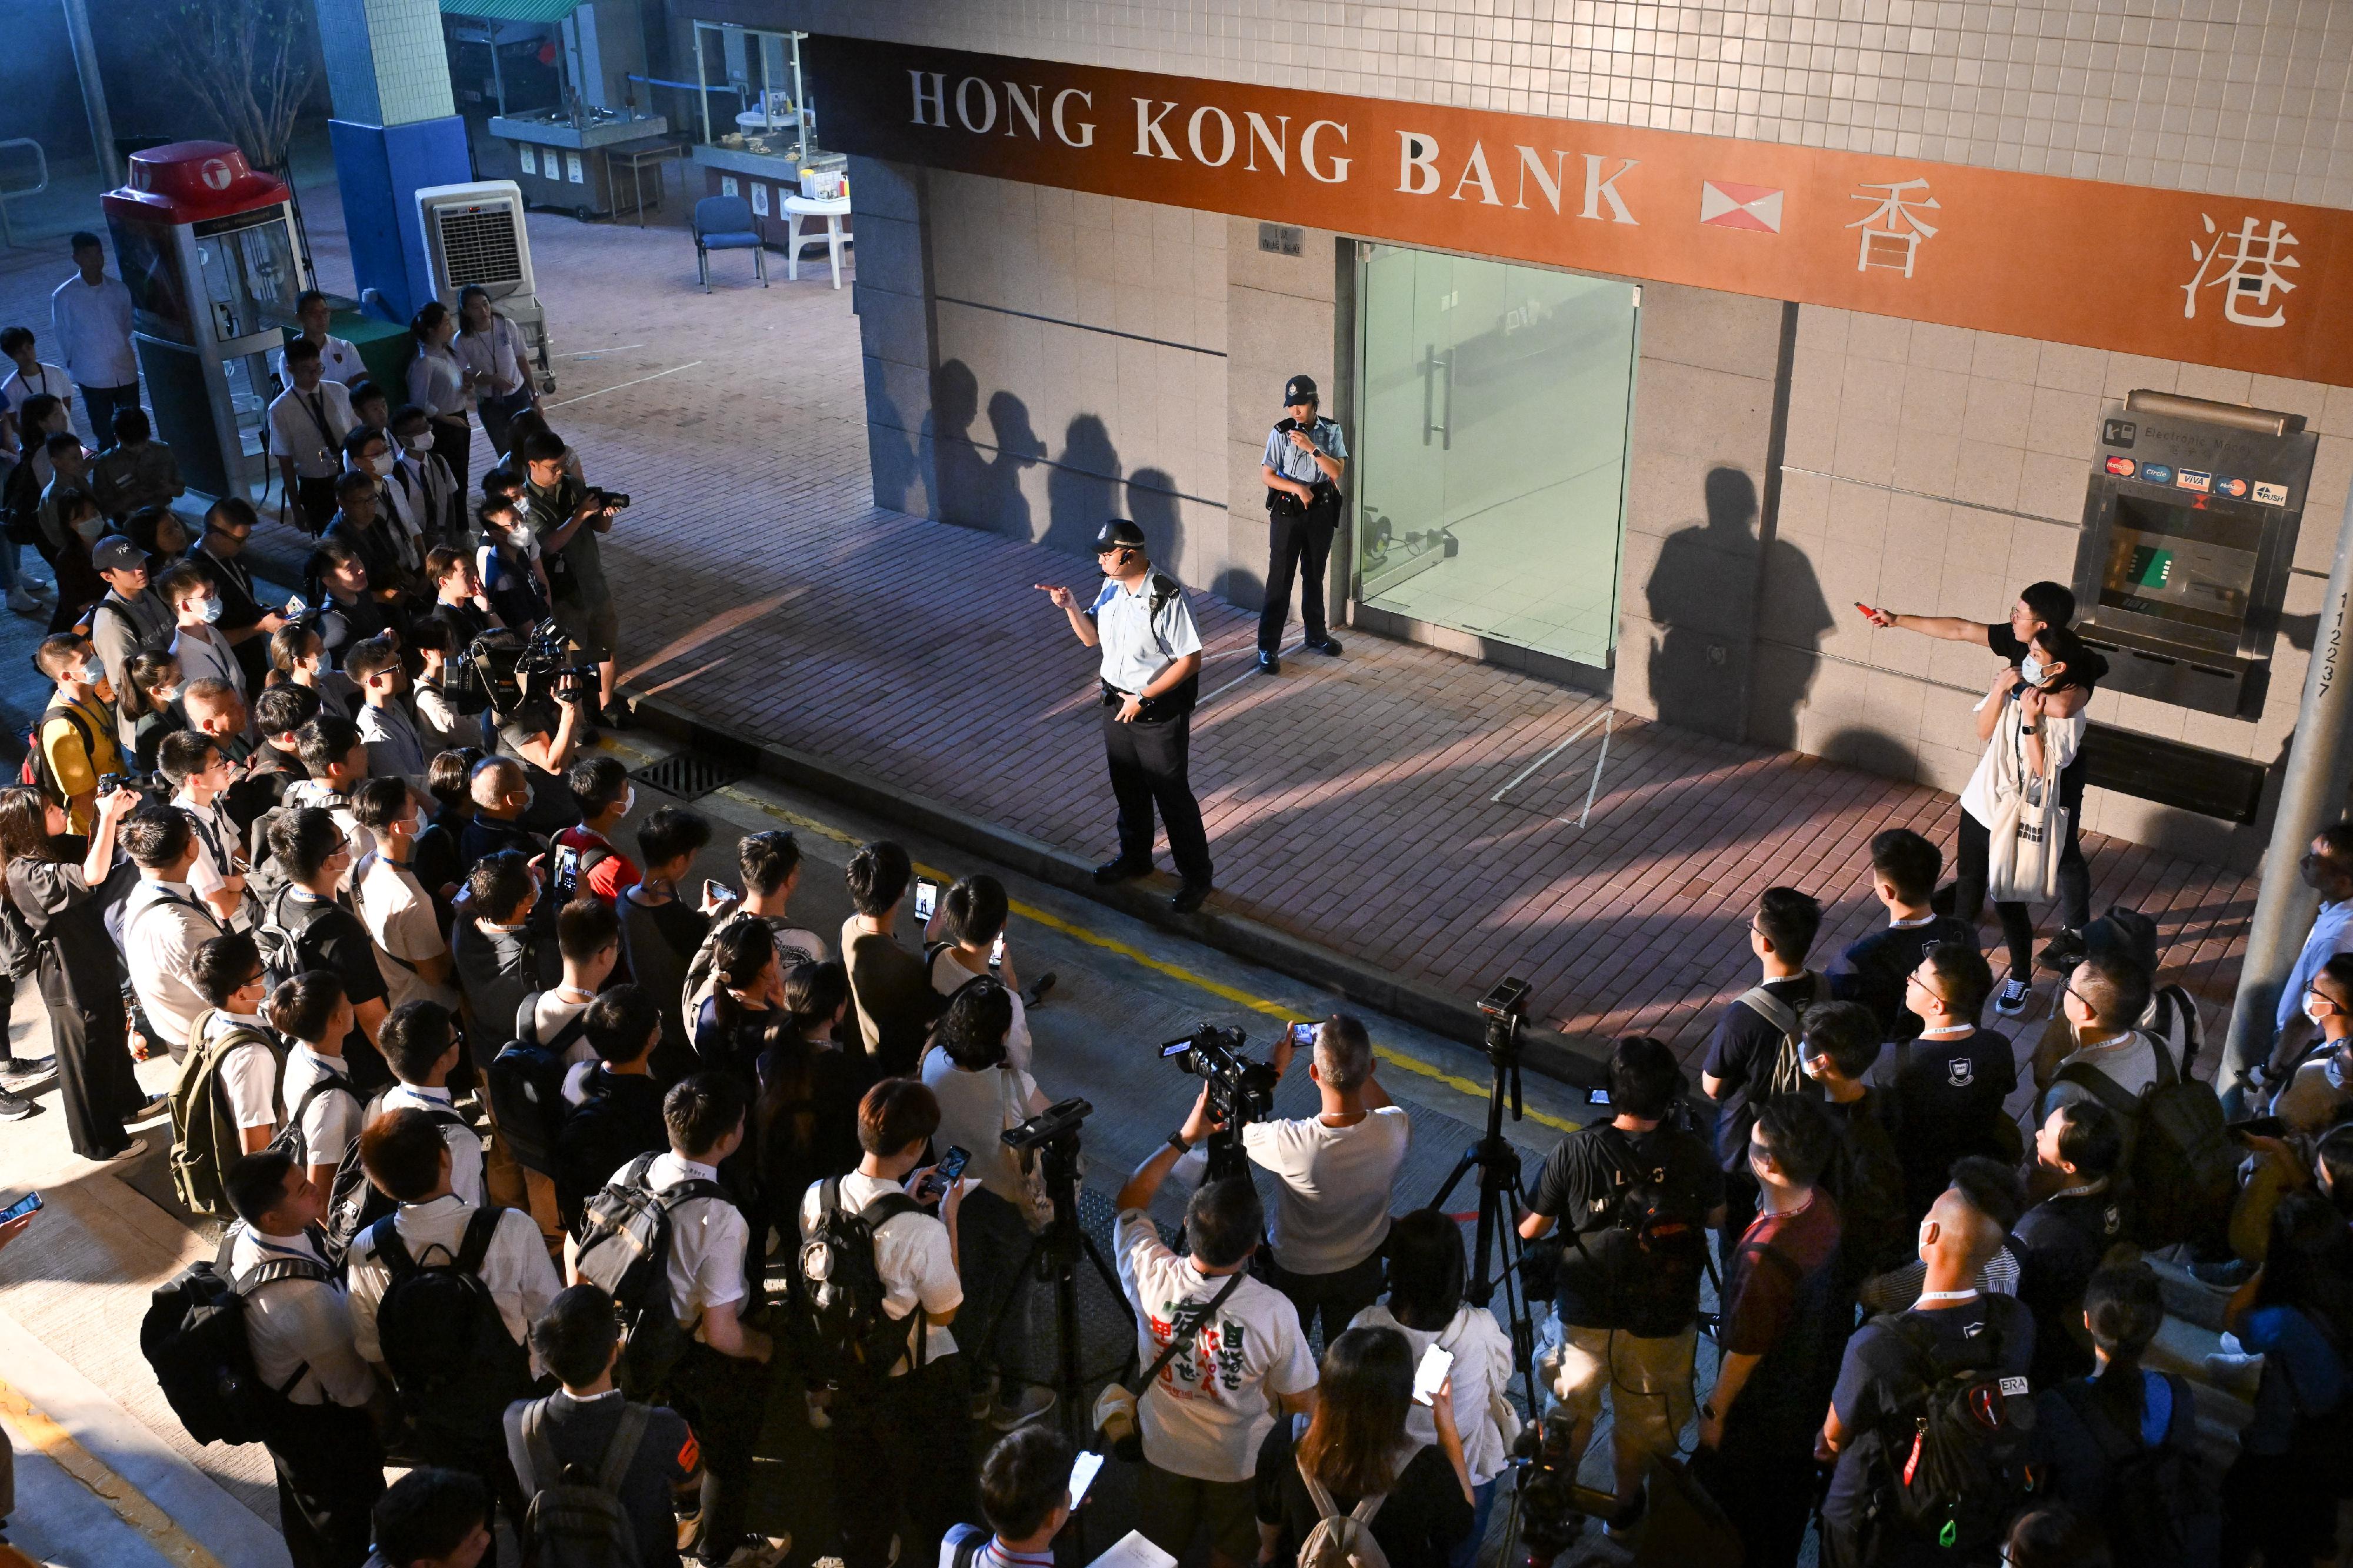 The Hong Kong Police Force today (June 18) organised the Police Recruitment Experience and Assessment Day at the Hong Kong Police College. Photo shows visitors participating in the "Interactive Live Show", to experience the challenges frontline officers face during daily patrol.